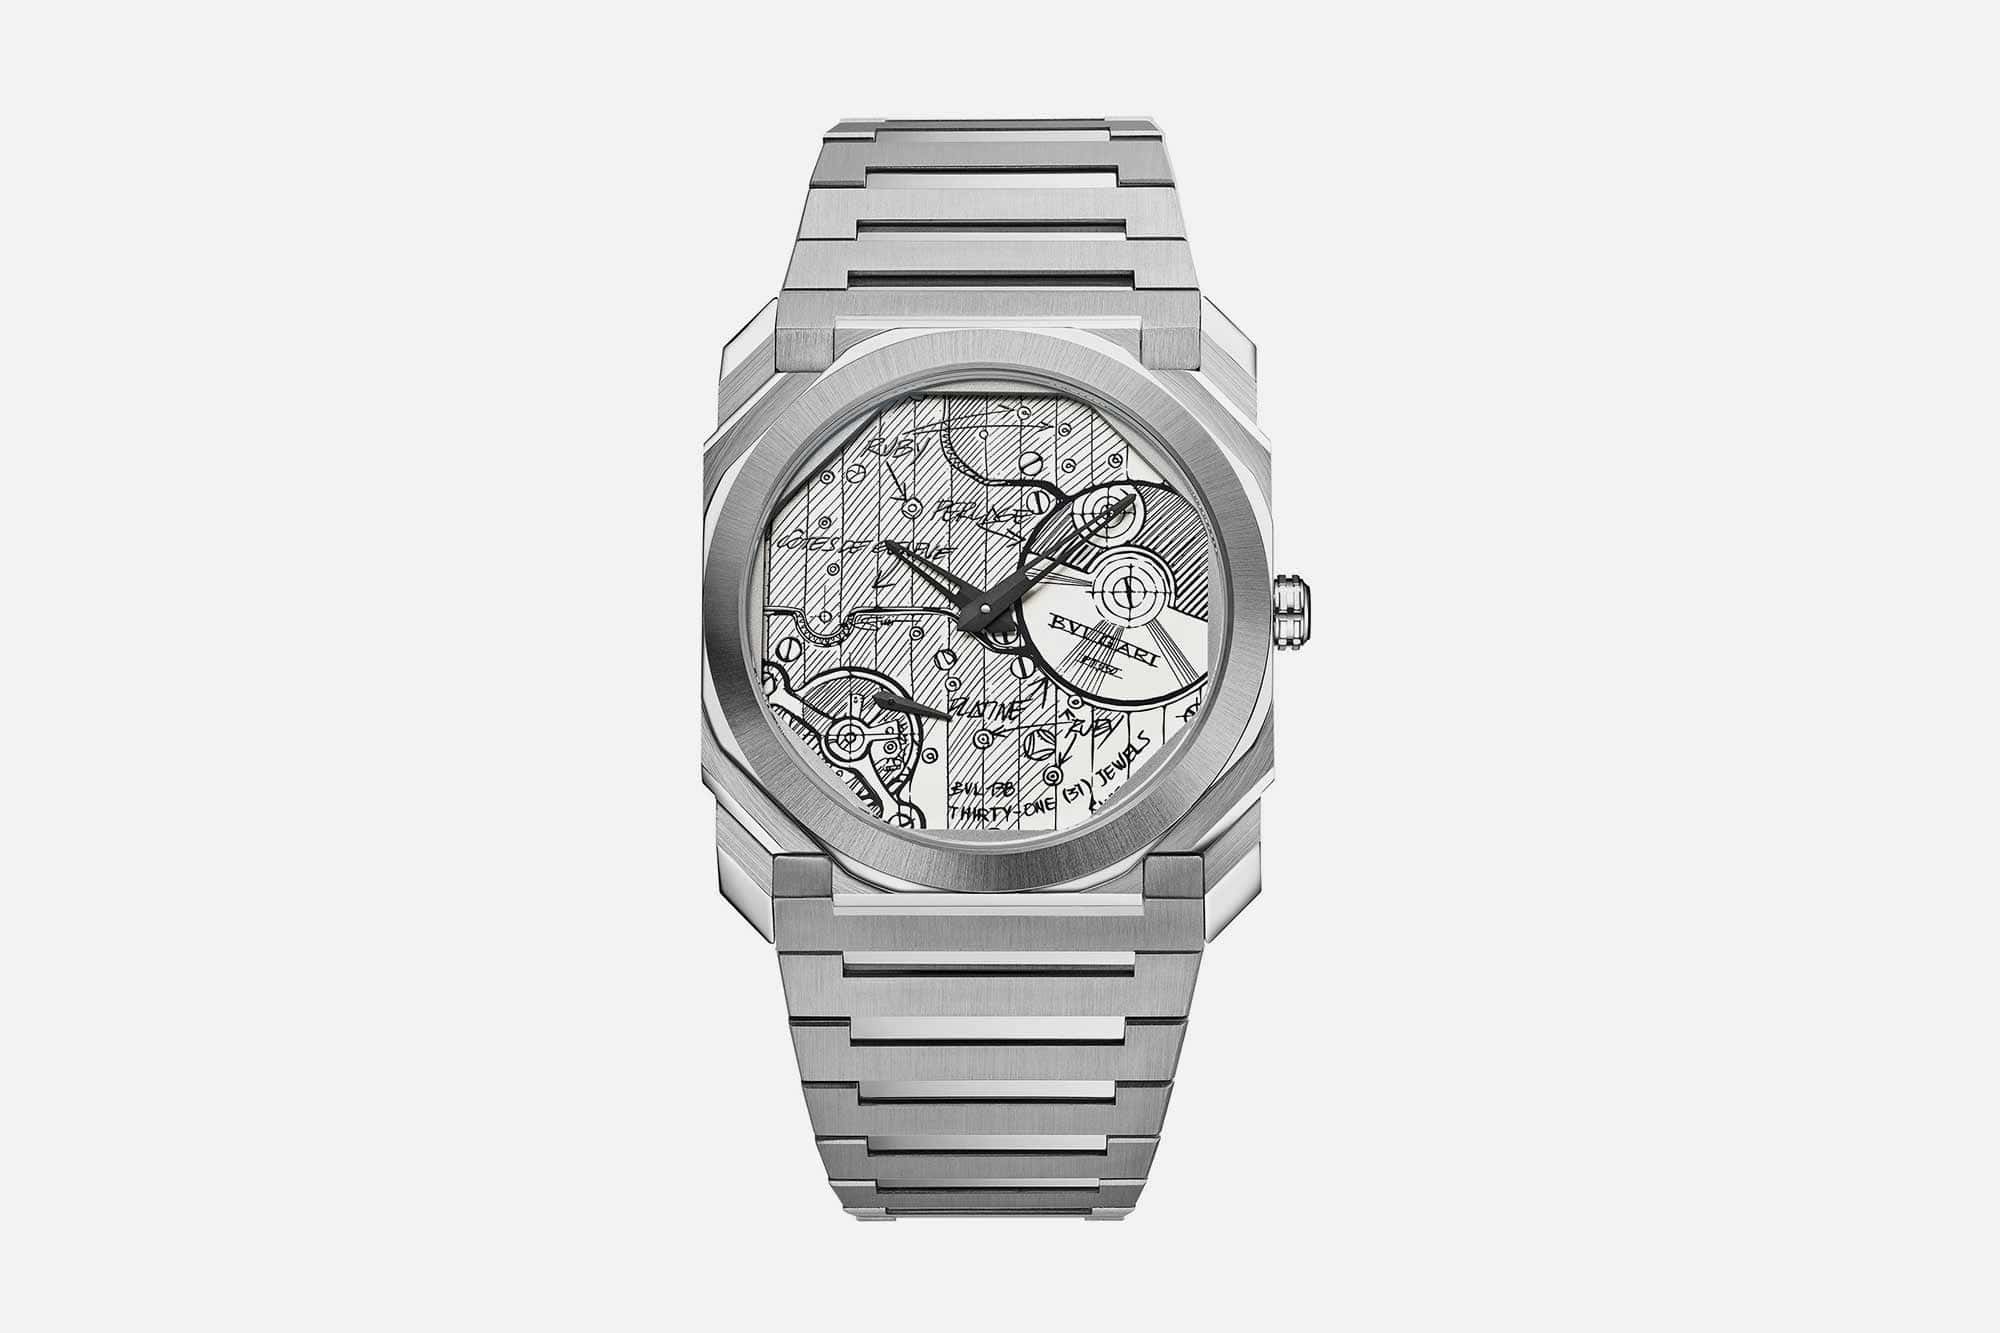 The Bulgari Octo Finissimo “Sketch” is Back